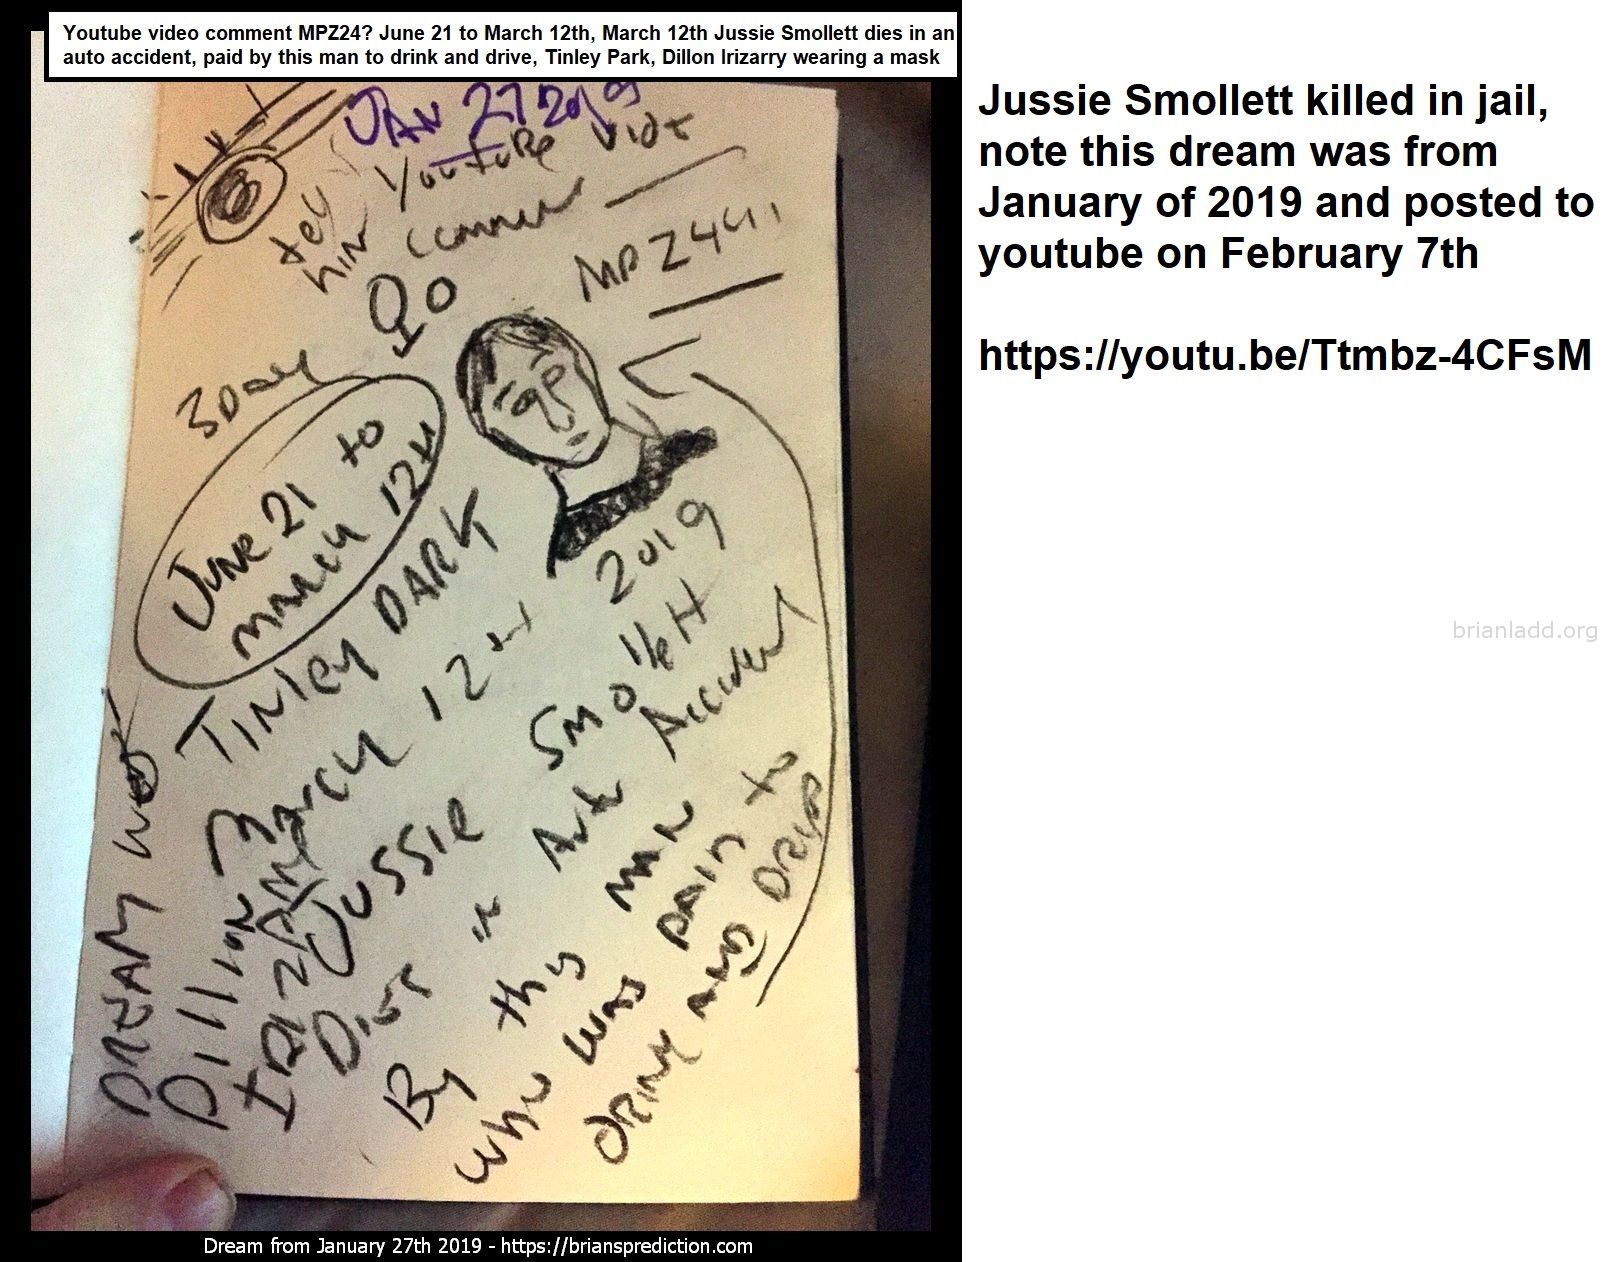 Jussie Smollett Killed In Jail  Note This Dream Was From January Of 2019 And Posted To Youtube On February 7Th - Jussie ...
Jussie Smollett Killed In Jail, Note This Dream Was From January Of 2019 And Posted To Youtube On February 7th   https://Youtu.Be/Ttmbz-4cfsm  2019 Chicago Incident  On January 29, 2019, Smollett Alleged That He Was Attacked In Chicago'S Streeterville Neighborhood, In What Was Initially Investigated As A Hate Crime.[31][32] Multiple Police Sources Have Informed The Media They Now Believe Smollett Orchestrated, Or Staged, The Attack Himself.[33]  Smollett Told Police That He Was Attacked Outside His Apartment Building By Two Men In Ski Masks Who Made Racial And Homophobic Slurs,[31] And Used Their Hands, Feet, And Teeth As Weapons In The Assault.[34][35] According To A Statement Released By The Chicago Police Department, The Two Suspects Then "poured An Unknown Liquid&Quot; On Smollett And Put A Noose Around His Neck.[36] Smollett Said That He Fought Them Off. Smollett Was Admitted To Northwestern Memorial Hospital; Not Seriously Injured, He Was Released "in Good Condition&Quot; Later That Morning,[31][37] Still Early.[38] The Police Were Called After 2:30 Am;[39] When They Arrived Around 2:40 Am, Smollett Had A White Rope Around His Neck.[40]  Tmz Reported That Sources Had Told Them That The Attackers Were White, And Had Said "This Is Maga Country&Quot;, Referencing President Donald Trump'S Make America Great Again Slogan. [41][42] Police Representatives Initially Dismissed Both Statements[42][43] Before Subsequently Confirming That Smollett Had, In A Follow-Up Interview, Described That The Attackers Had Shouted "MAGA Country&Quot; During The Assault,[32] Something He Had Not Mentioned In The Initial Interview With Police.[40] However, There Was No Change With Regard To Smollett Not Identifying The Race Of The Attackers (the Released Initial Police Report Shows No Race In The Demographics Section For Either Suspect).[34] Tmz Wrote That Smollett Was Doused With Bleach, But It Was Mainly Described In News Reports As "an Unknown Chemical Substance&Quot;, As It Was In The Initial Police Report.[42] Cbs News Reported That Police Officers Described Smelling Bleach On His Clothes.[44]  On January 30 Some Public Figures Expressed Support For Smollett On Social Media.[32][45] Entertainment Industry Figures, Including Shonda Rhimes And Viola Davis, Tweeted Their Outrage And Support.[45] Democratic Senators And Candidates For The Party'S Presidential Nominations Kamala Harris And Cory Booker Both Described The Attack As A Modern-Day Lynching,[46] With Booker Urging Congress To Pass The Federal Anti-Lynching Bill He And Harris Have Co-Sponsored.[45][47] In An Interview With April Ryan Of Aurn, President Donald Trump Said, "That, I Can Tell You, Is Horrible. I'Ve Seen It. I Think That'S Horrible. It Doesn'T Get Worse."[48]  The Associated Press Reported That Police Had Released Images Of "persons Of Interest&Quot; From Surveillance Camera Footage, But Were Unable To Find Footage Of Smollett Being Attacked.[49]  Both Smollett And His Manager Brandon Z. Moore Told Authorities They Were Having A Phone Conversation With Each Other At The Time,[50] Moore Saying He Heard Some Of What Transpired,[51] Including "MAGA Country&Quot;, A Scuffle, And A Racial Slur.[51][52] Police Have Not Confirmed Moore'S Account With Phone Records.[52] Smollett Refused To Turn His Cellphone Over To Detectives To Allow Them To Confirm The Call.[53] On February 12, 2019, Chicago Police Stated That The Redacted Pdf Phone Records Released By Smollet'S Team "are Not Sufficient And Do Not Meet The Burden For Criminal Investigation,&Quot; And That More Cooperation Would Be Required.[54][55][56]  Smollett Performed A Solo Engagement At The Troubadour In Los Angeles On February 2, 2019,[57] Although A Scheduled Meet-And-Greet Prior To The Show Was Cancelled, Citing Security Concerns.[58]  On February 13, 2019, Chicago Police Raided The Home Of Two "persons Of Interest&Quot; In The Case. The Men Are Brothers And Of Nigerian Descent And Have Acted As Extras On Empire. Police Recovered Bleach And Other Items From The Home And Are Inquiring If The Men Know Smollett.[59] The Brothers Were Held In Police Custody On Suspicion Of Battery But Were Not Charged.[54] According To The Brothers' Attorney, They Know Smollett From Working On The Show And Have Also Spent Time With Him At A Gym.[54] The Two Men Were Arrested After Arriving On A Flight To O'Hare International Airport From Nigeria On February 13, 2019.[60][61] The Two Nigerian Men Were Released February 15 Without Being Charged With A Crime,[62][63] With Chicago Police Spokesman Anthony Guglielmi Stating: "Due To New Evidence As A Result Of Todayâ€™S Interrogations, The Individuals Questioned By Police In The Empire Case Have Now Been Released Without Charging And Detectives Have Additional Investigative Work To Complete."[62]  Chicago Police Later Told Abc News: "Police Are Investigati
